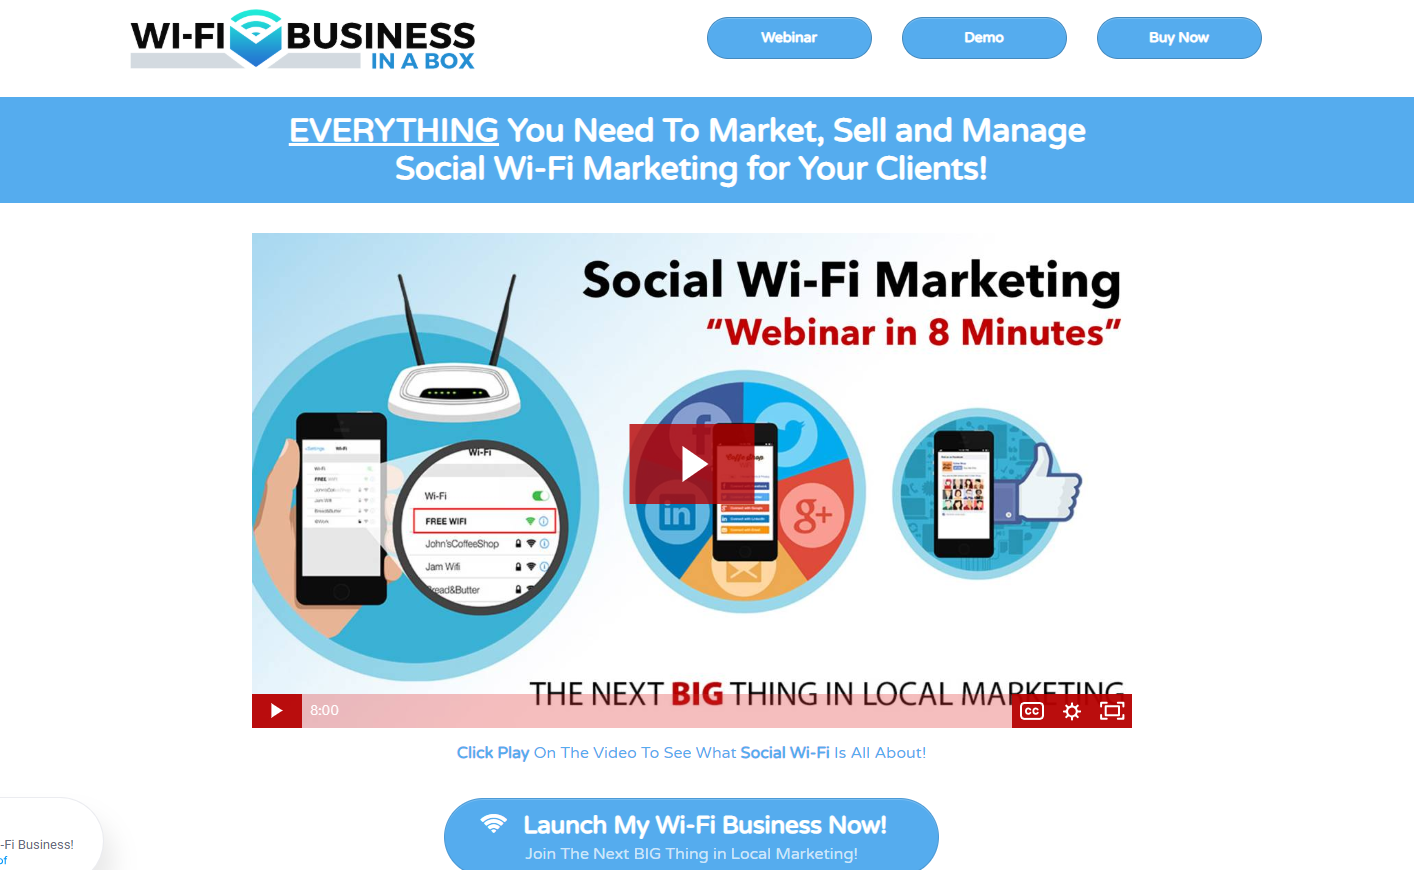 How To Launch Your Wi-Fi Business- MyWi-FI Business